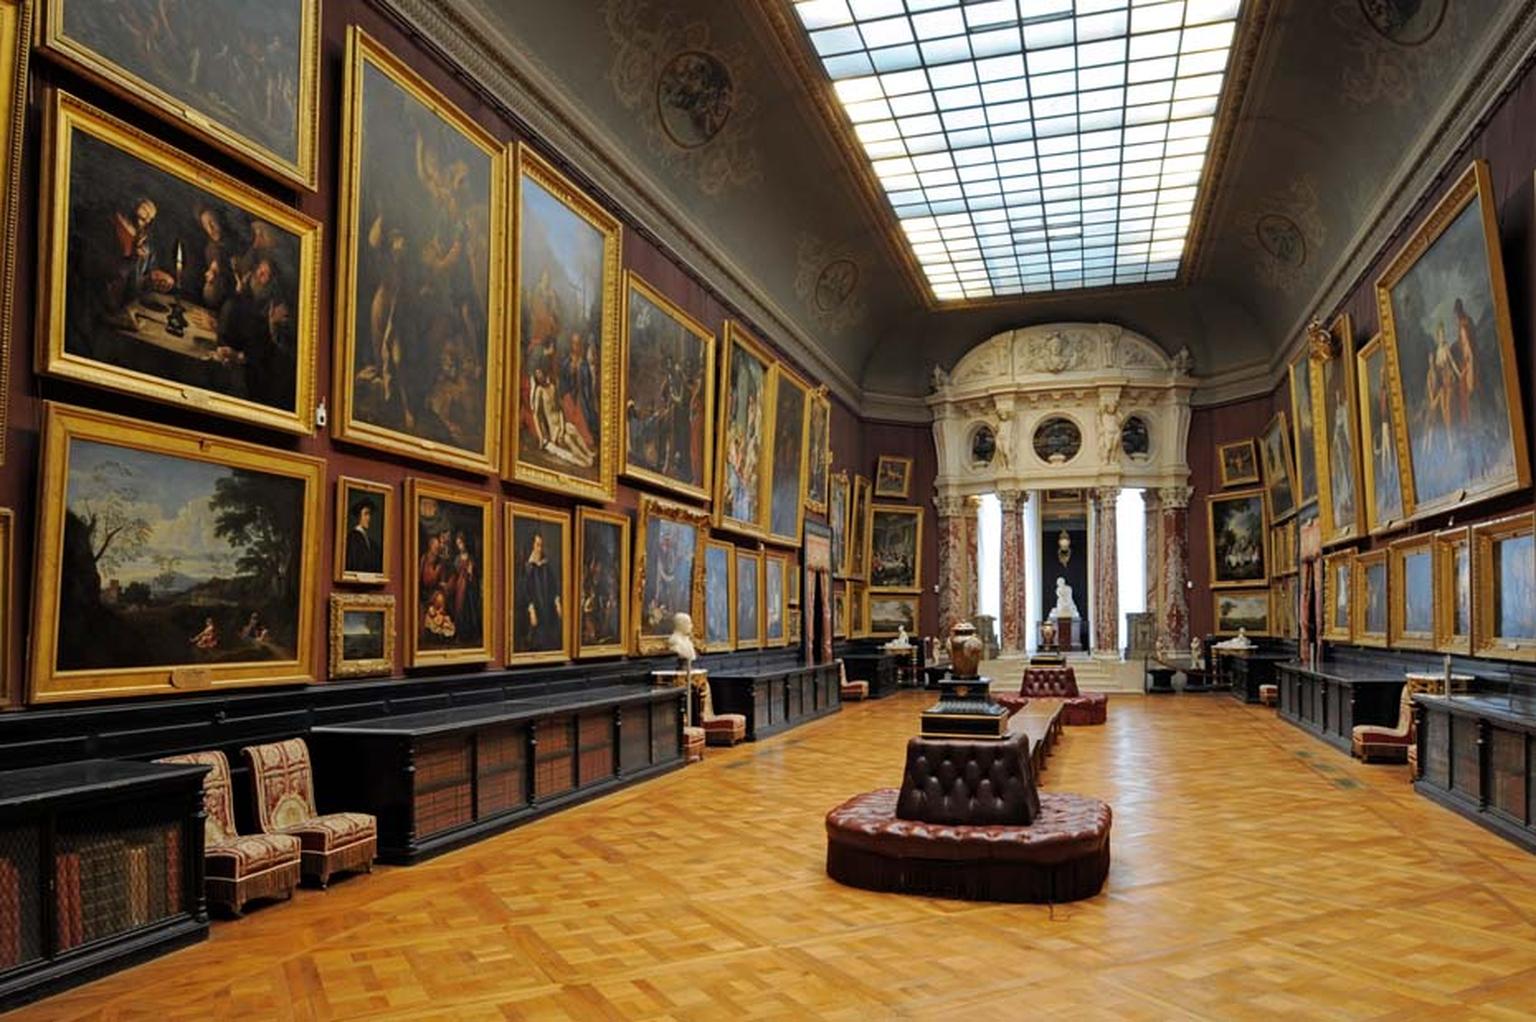 During the Chantilly Arts & Elegance event the castle was open to visitors, with the ancient paintings on display at the Condé Museum, second only to those of the Louvre.